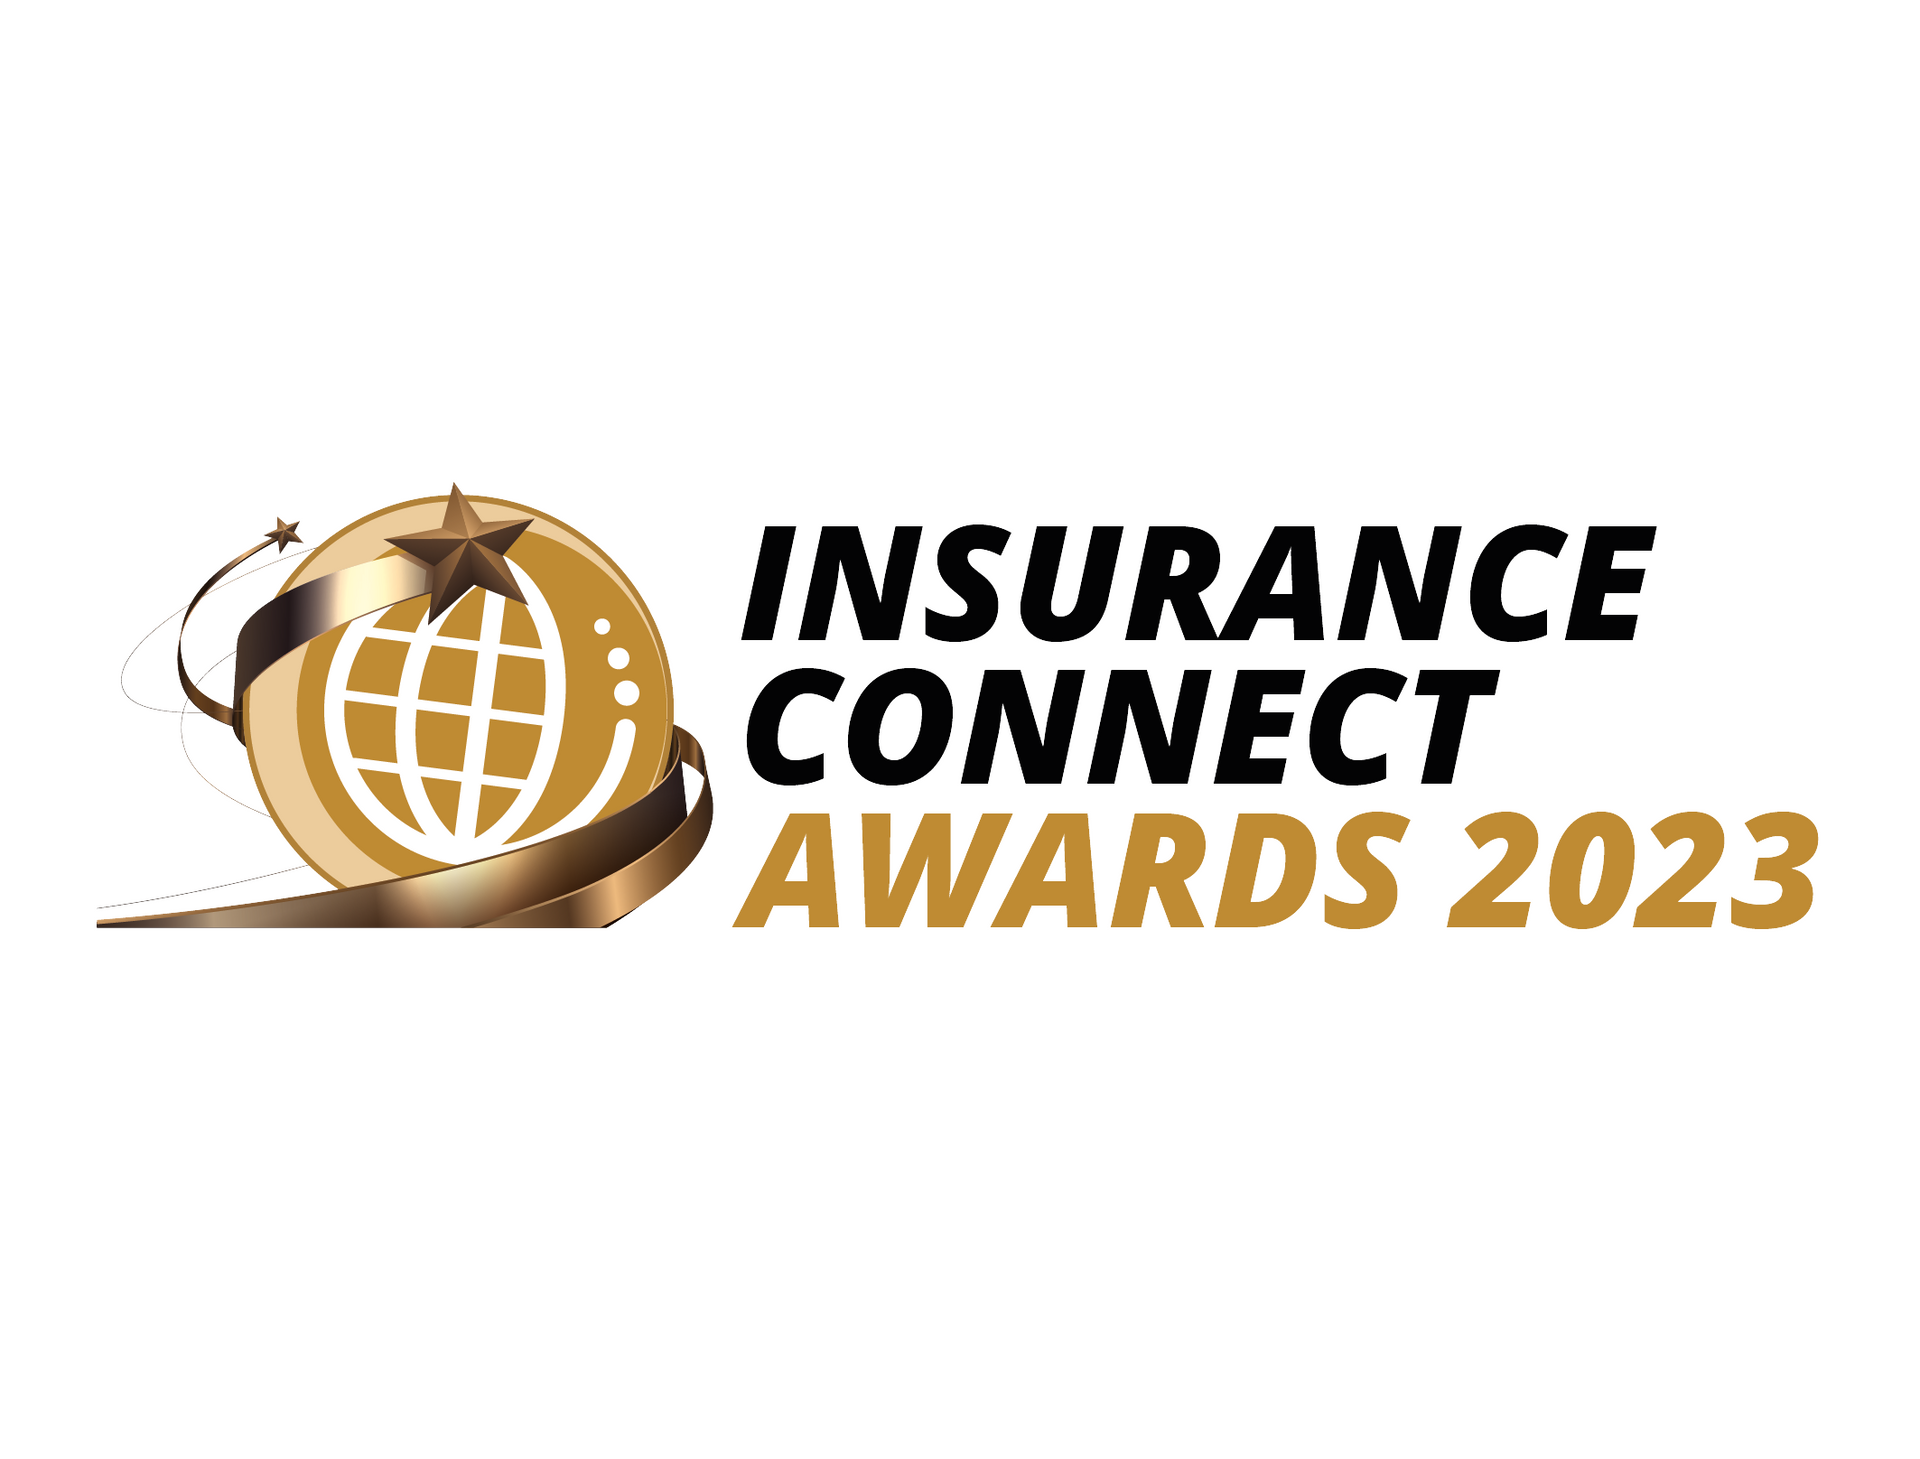 The logo for the insurance connect awards 2023